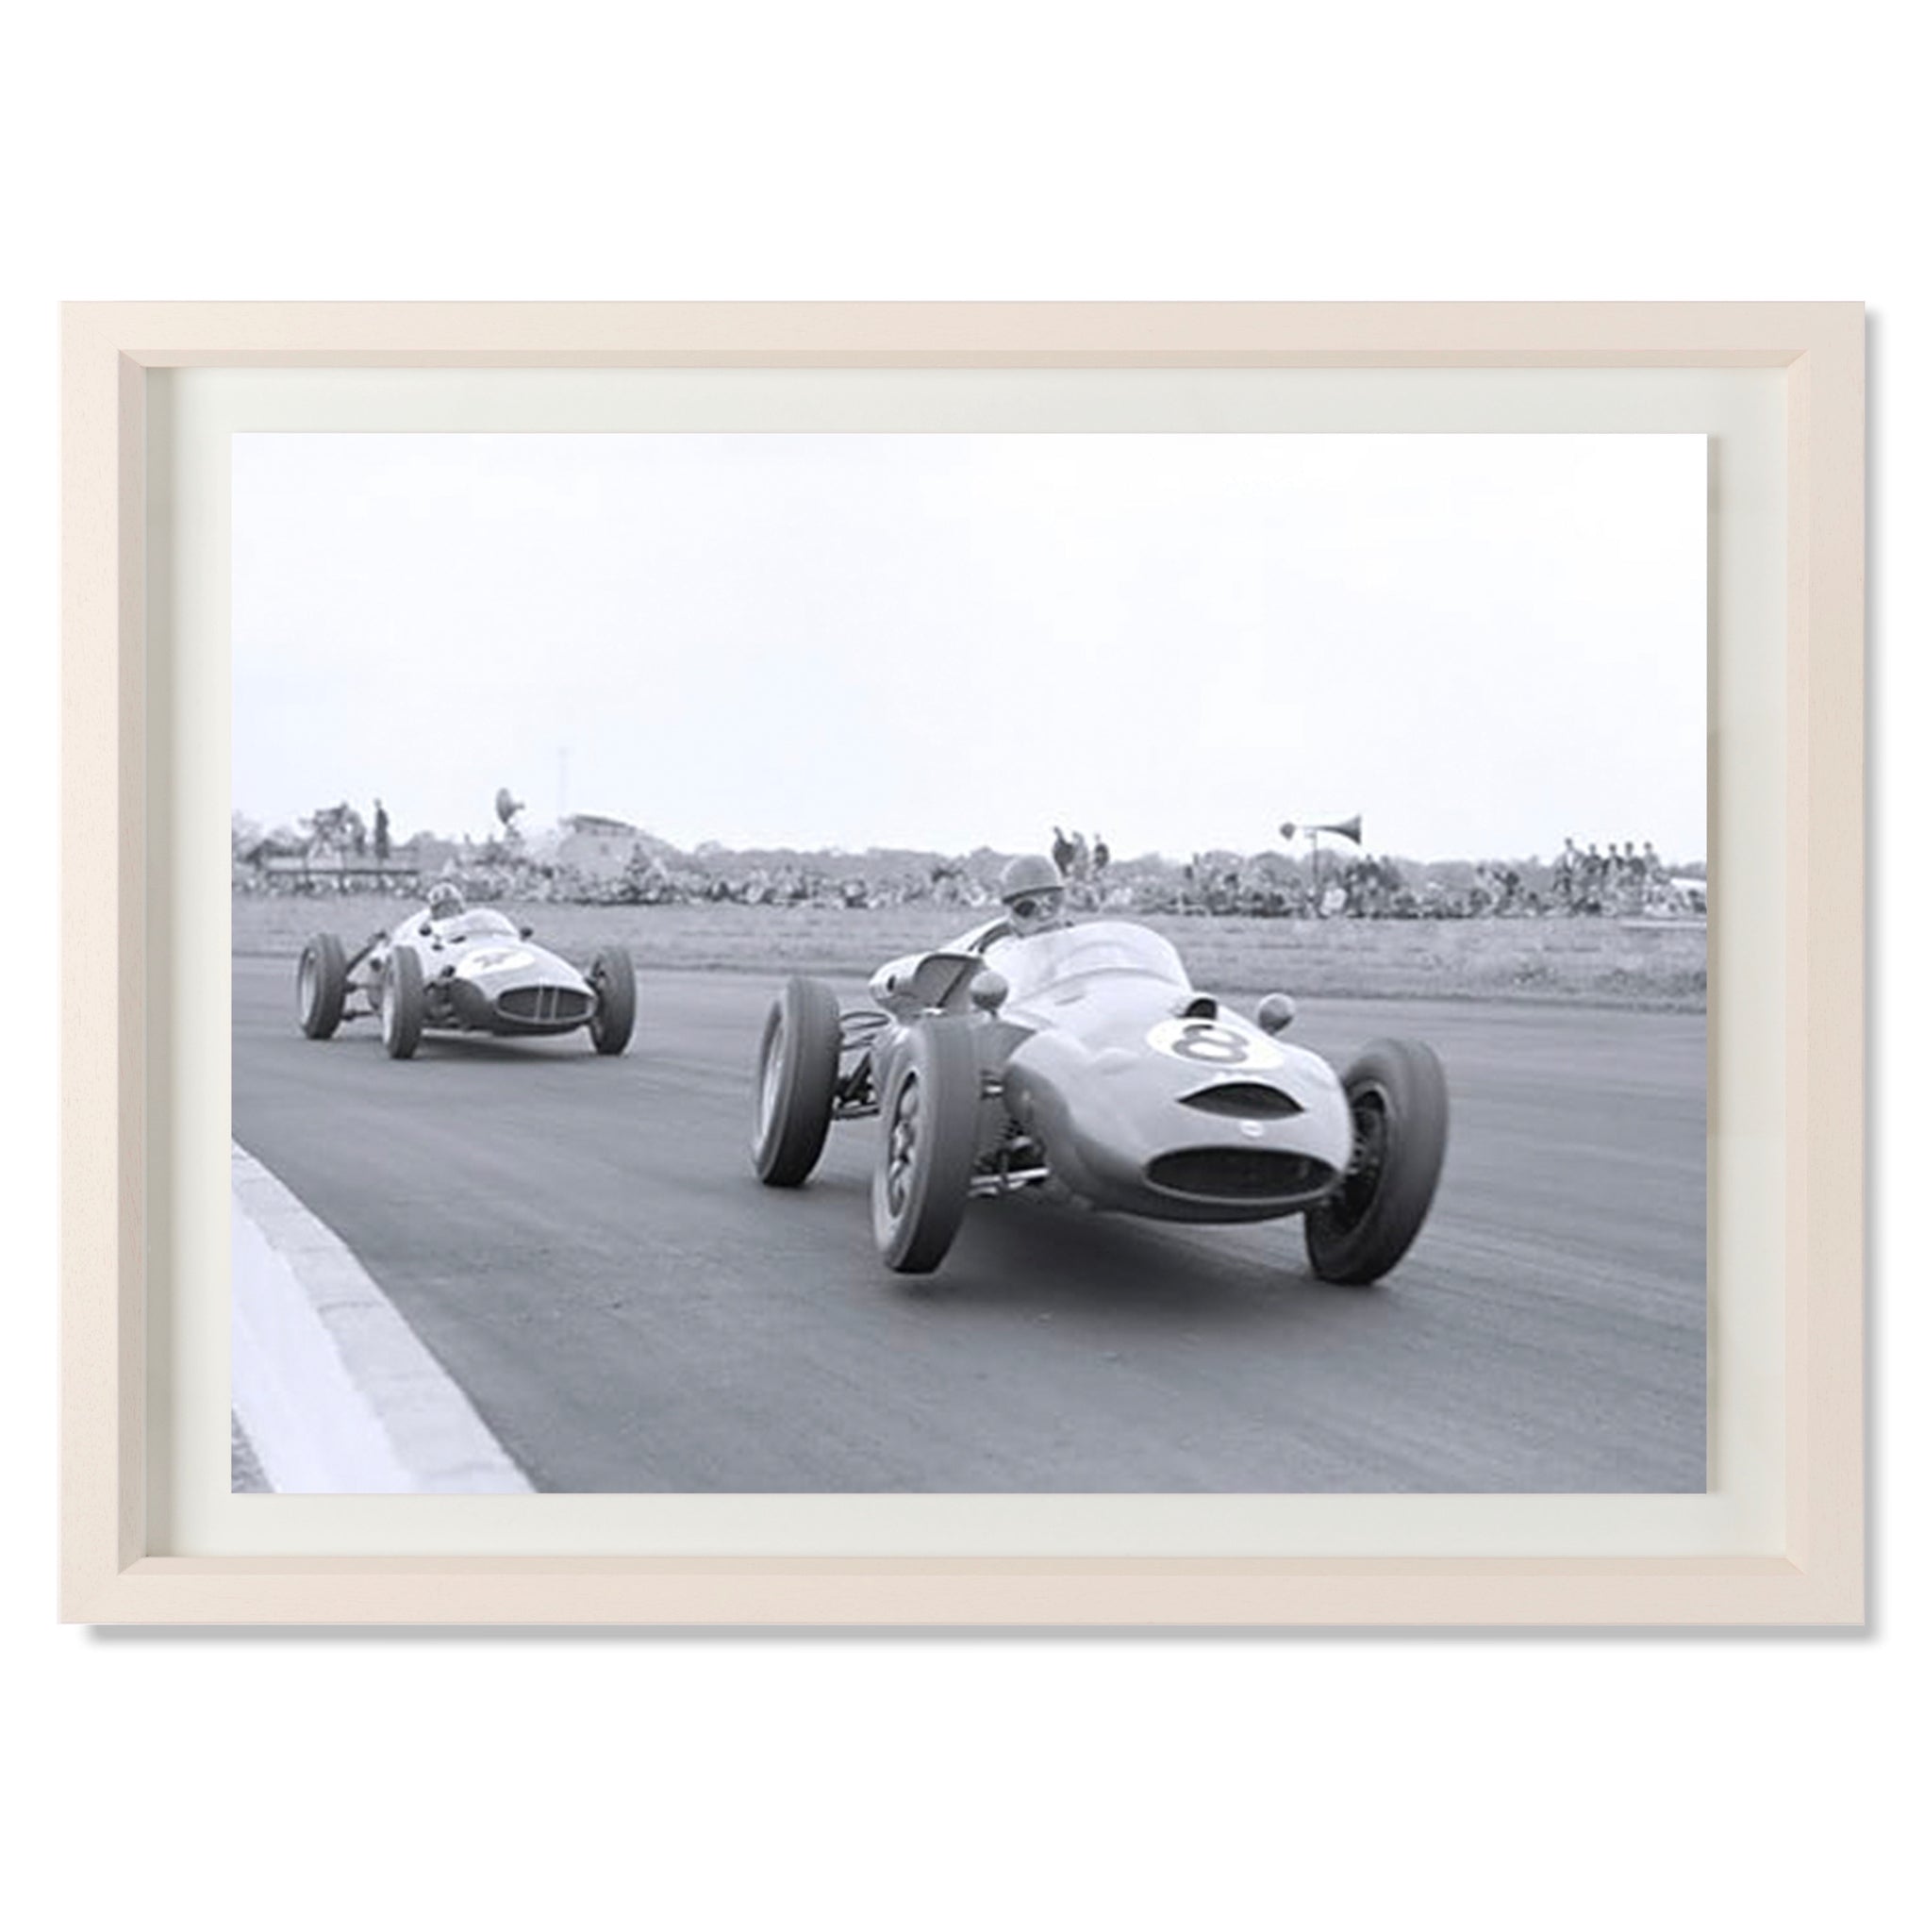 Graham Hill In Pursuit, Silverstone